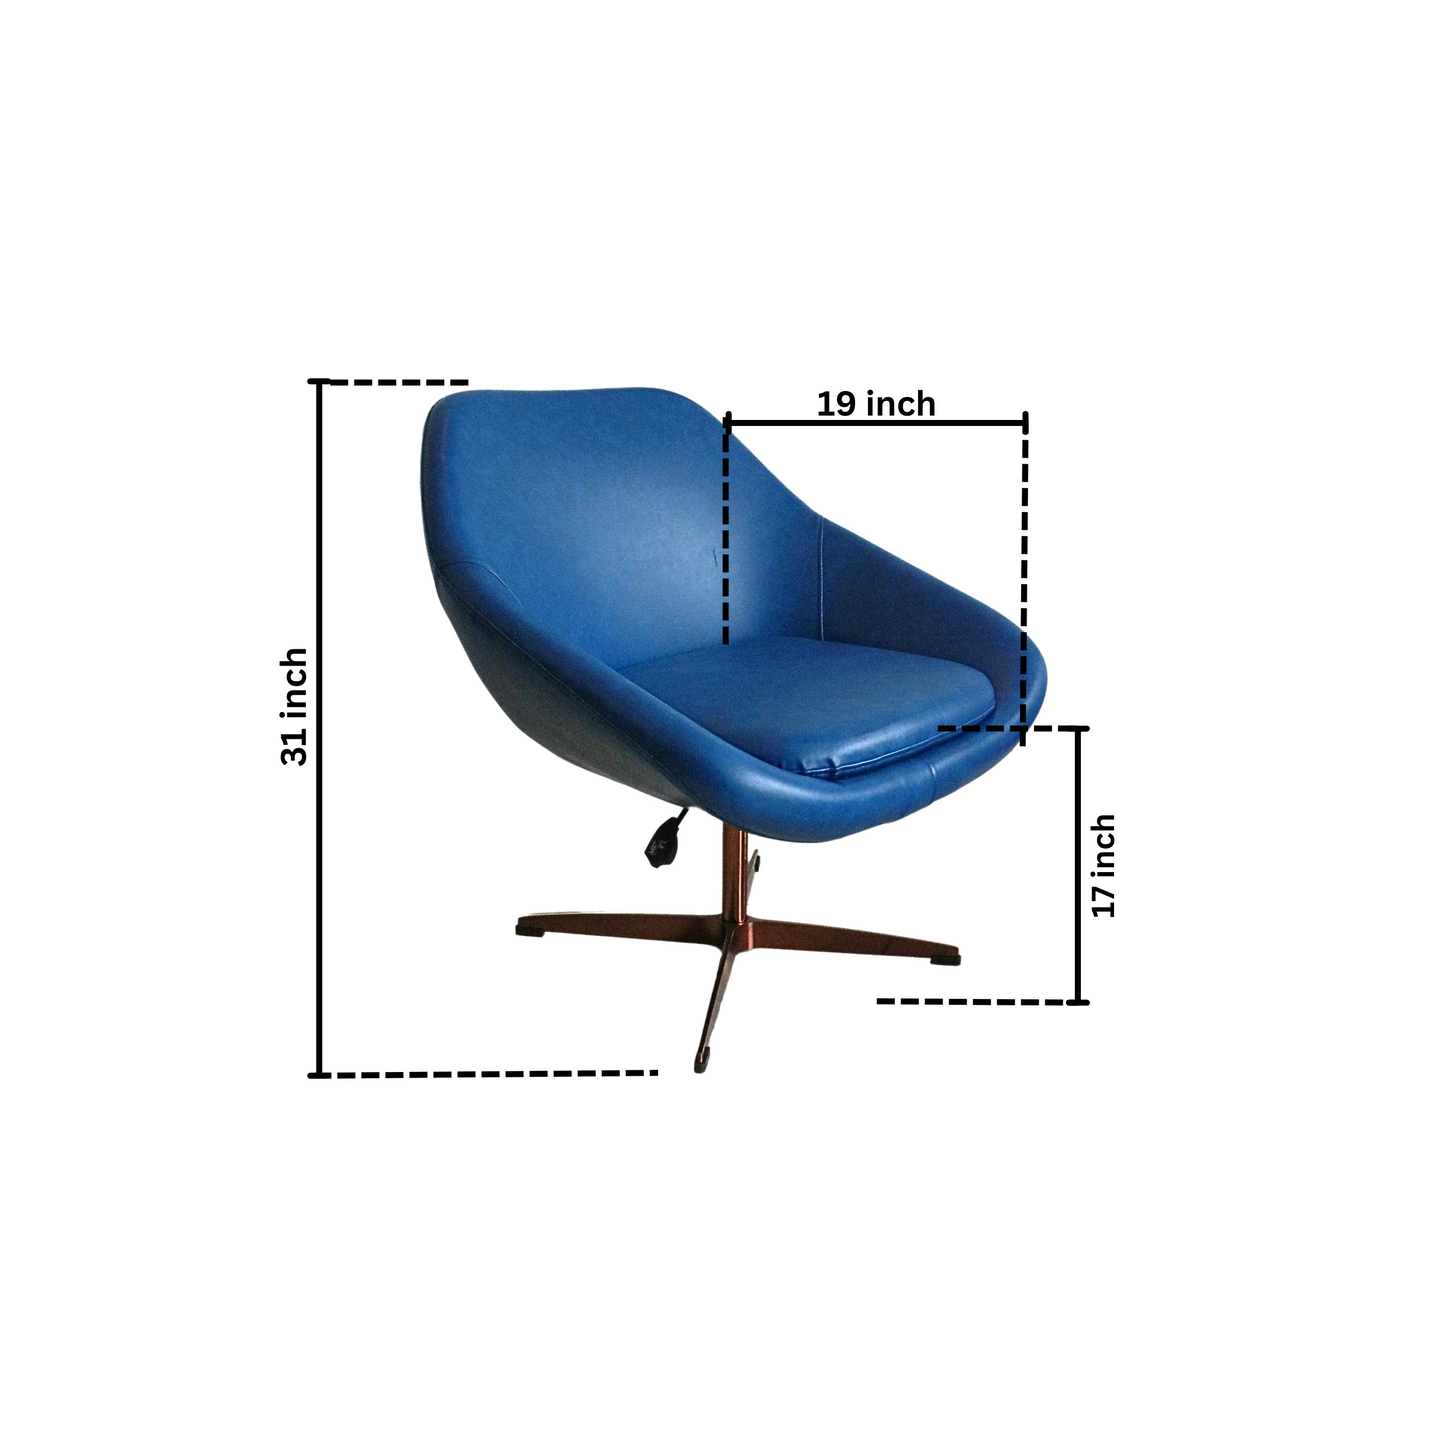 KNOLL Lounge Chair | olc | w&s | con